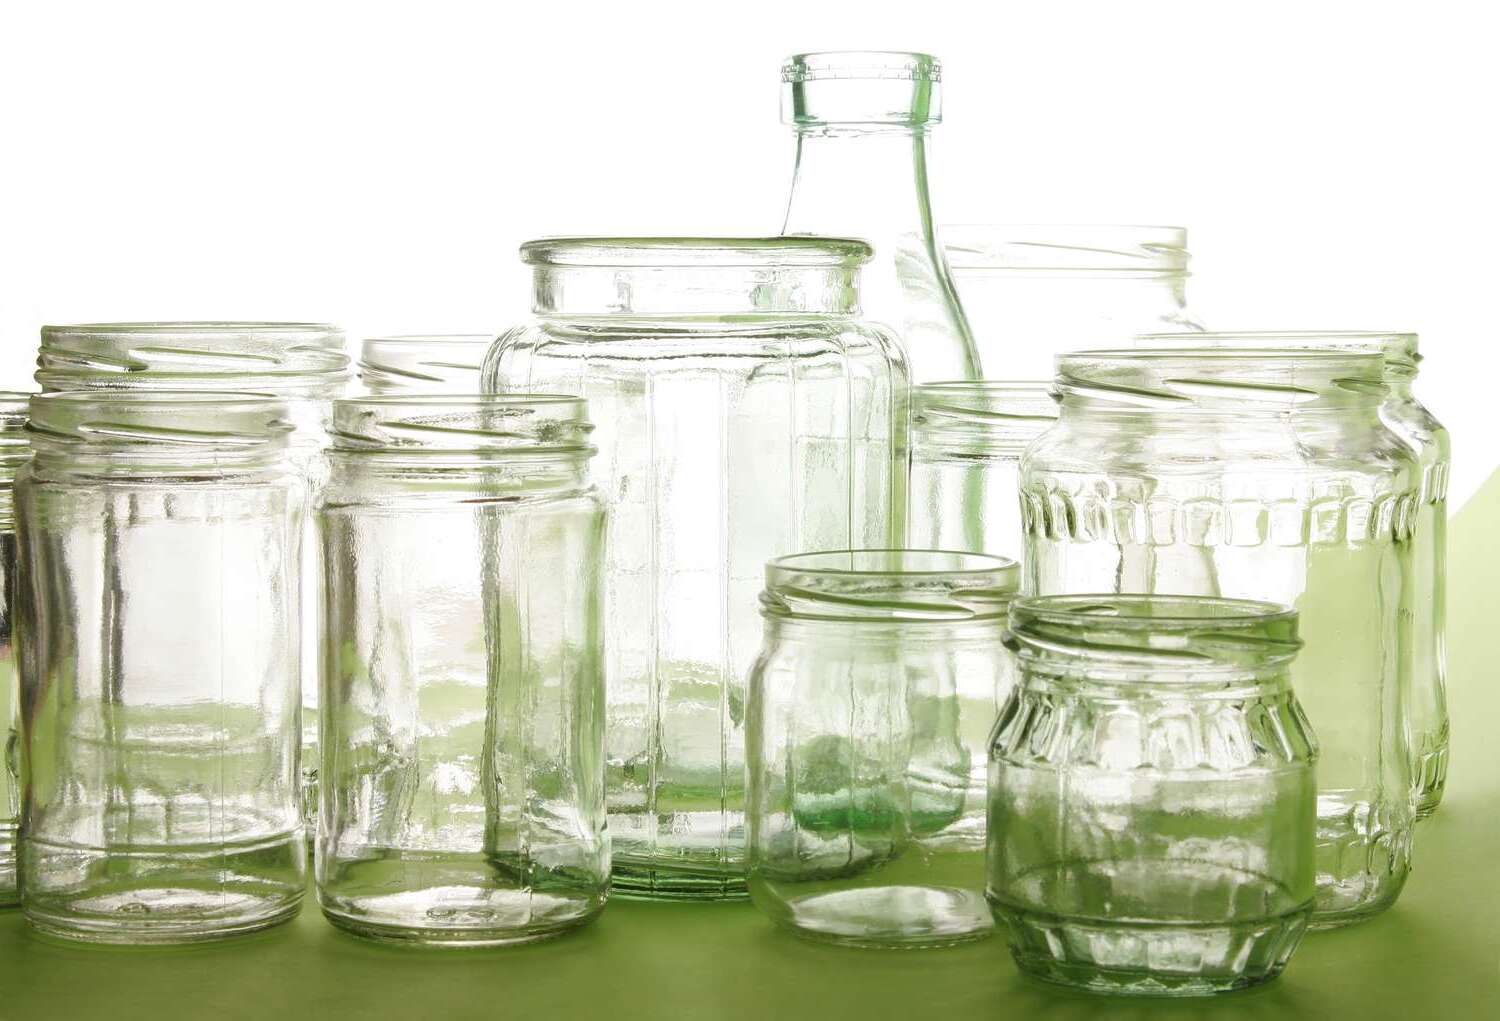 20-facts-about-glass-recycling